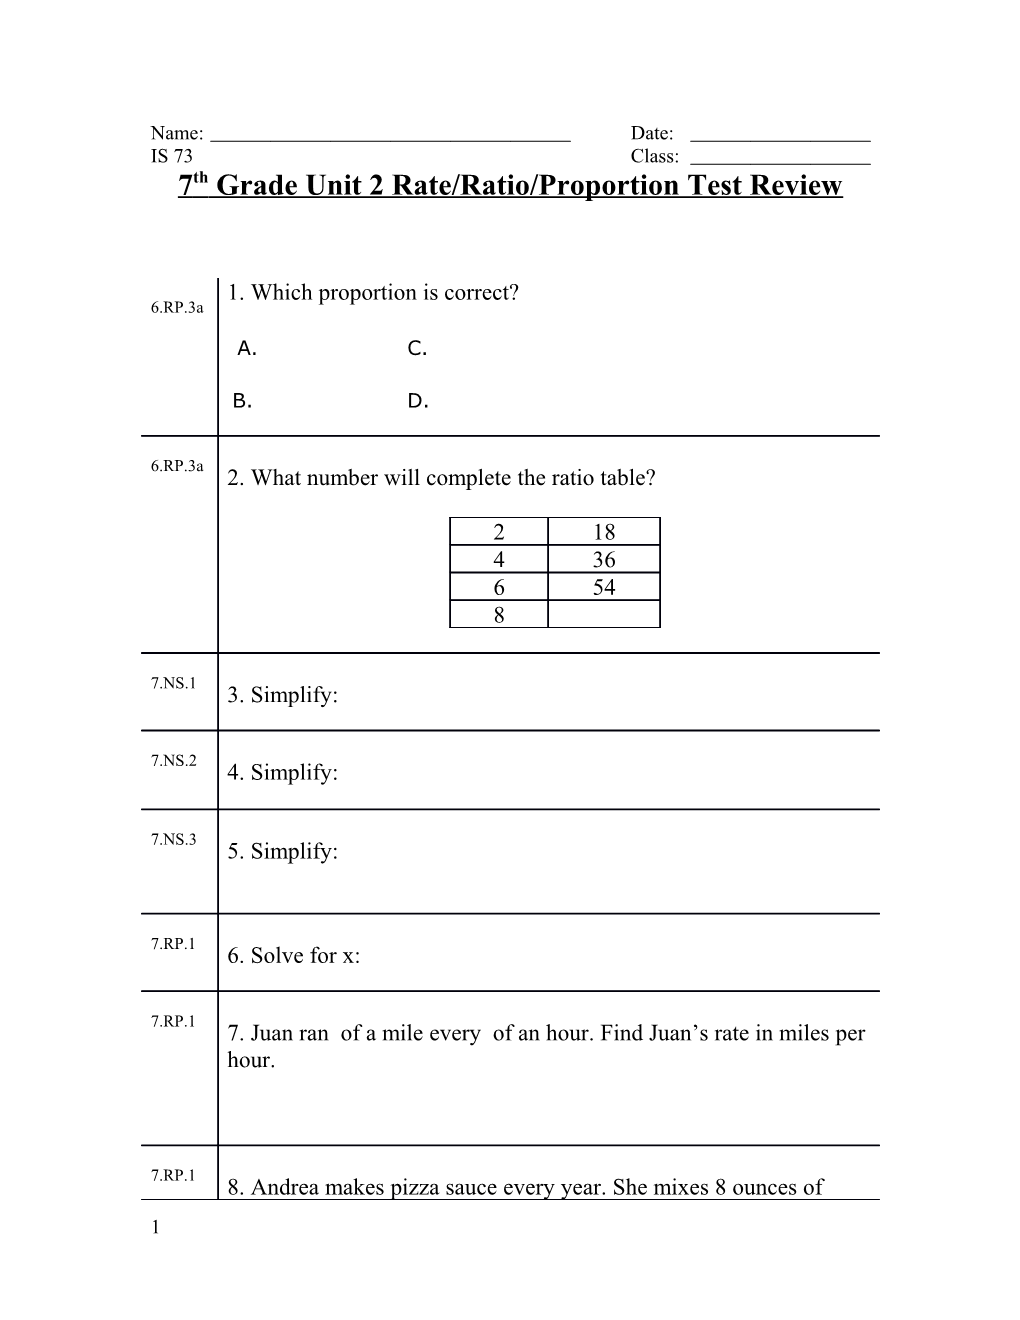 7Th Grade Unit 2 Rate/Ratio/Proportion Test Review